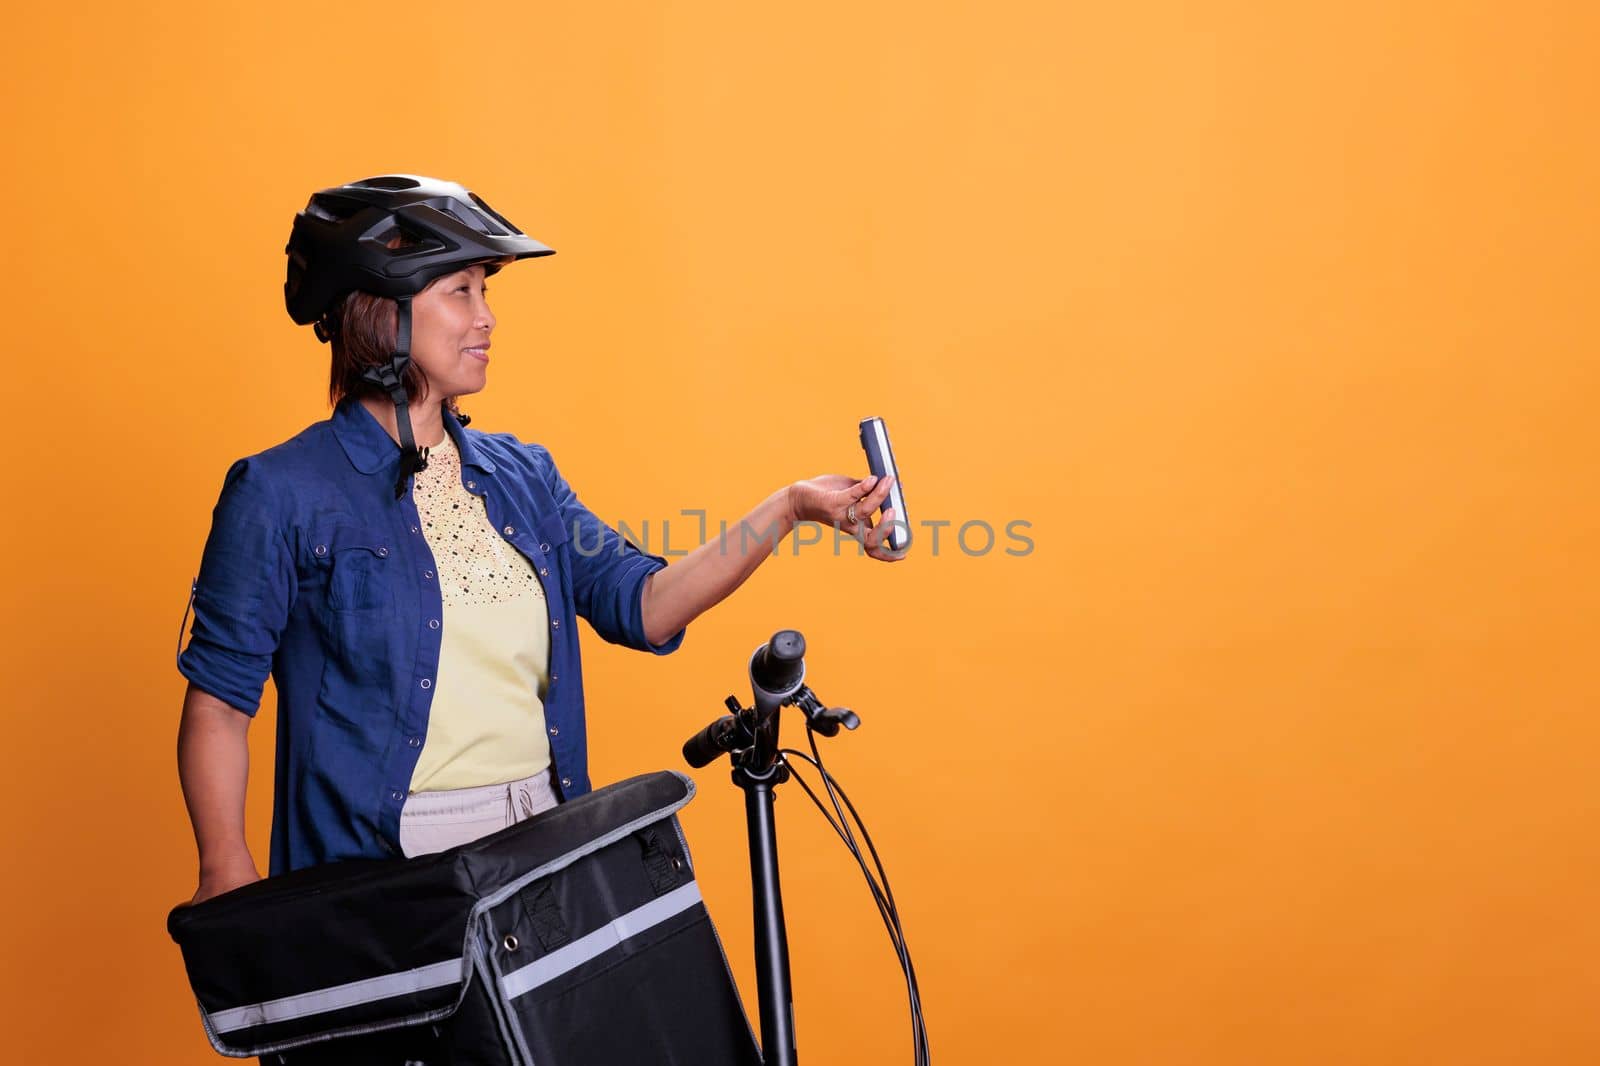 Restaurant employee with blue uniform and helmet delivering fast food order by DCStudio